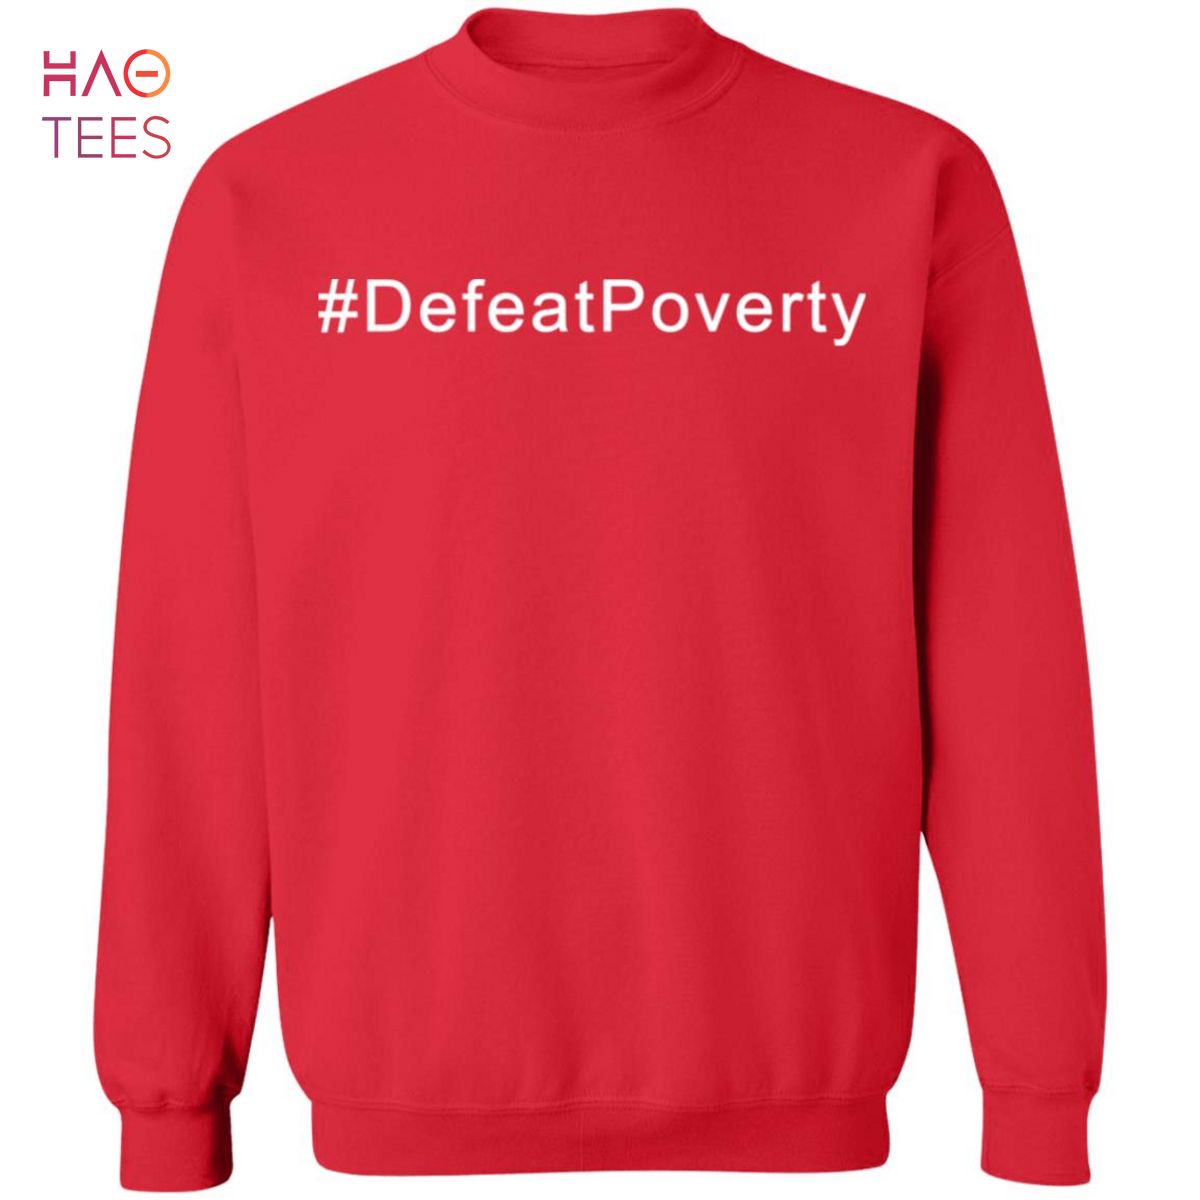 HOT Defeat Poverty Sweater